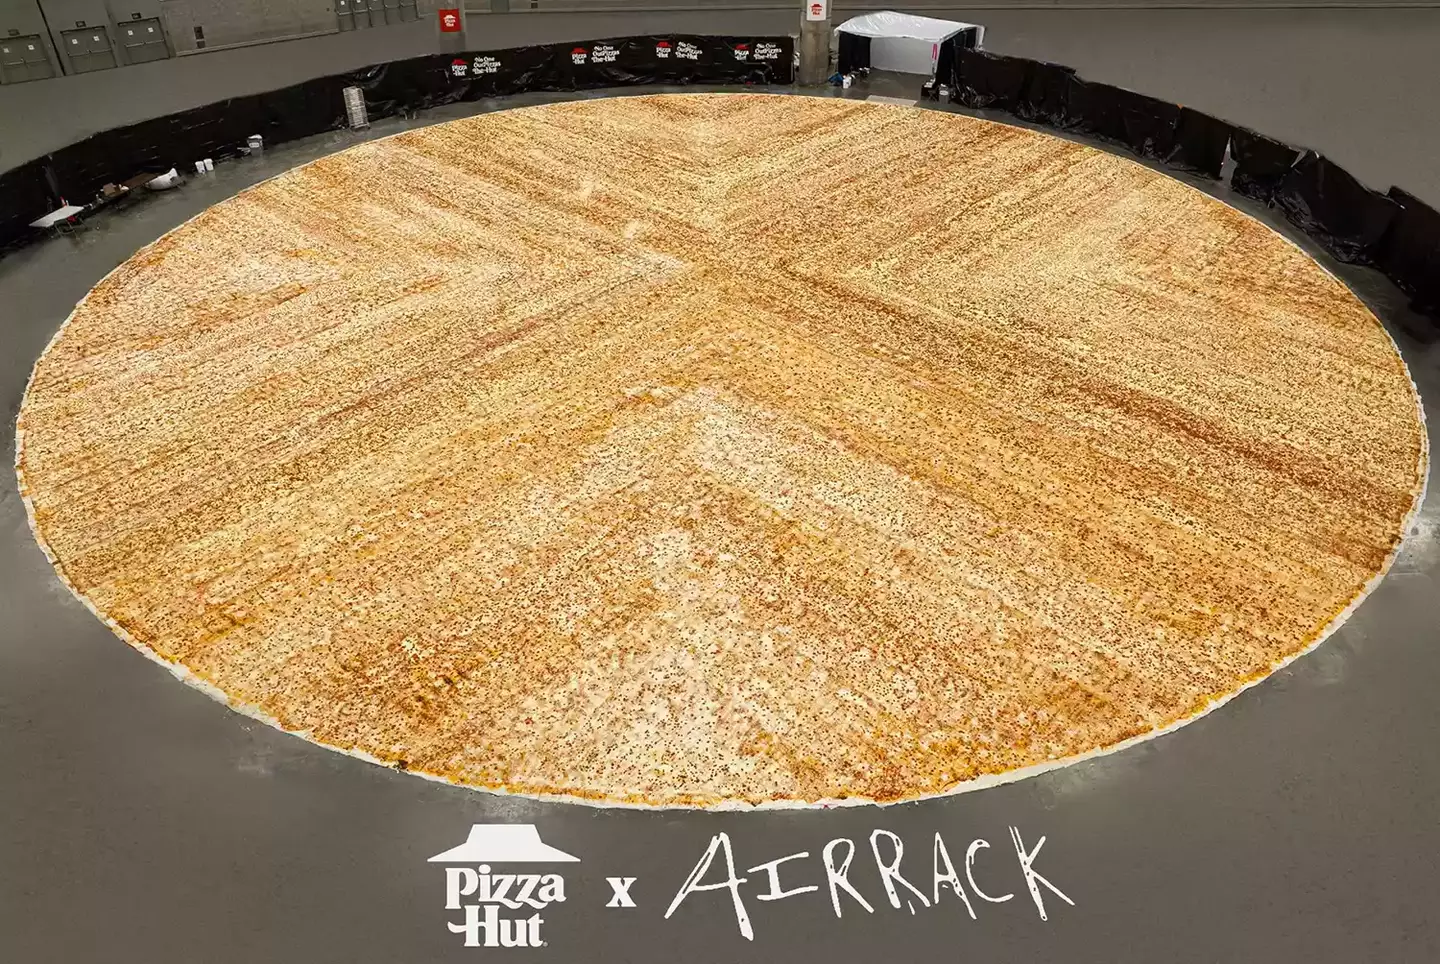 There was enough pizza for about 68,000 slices which were donated to local charities.